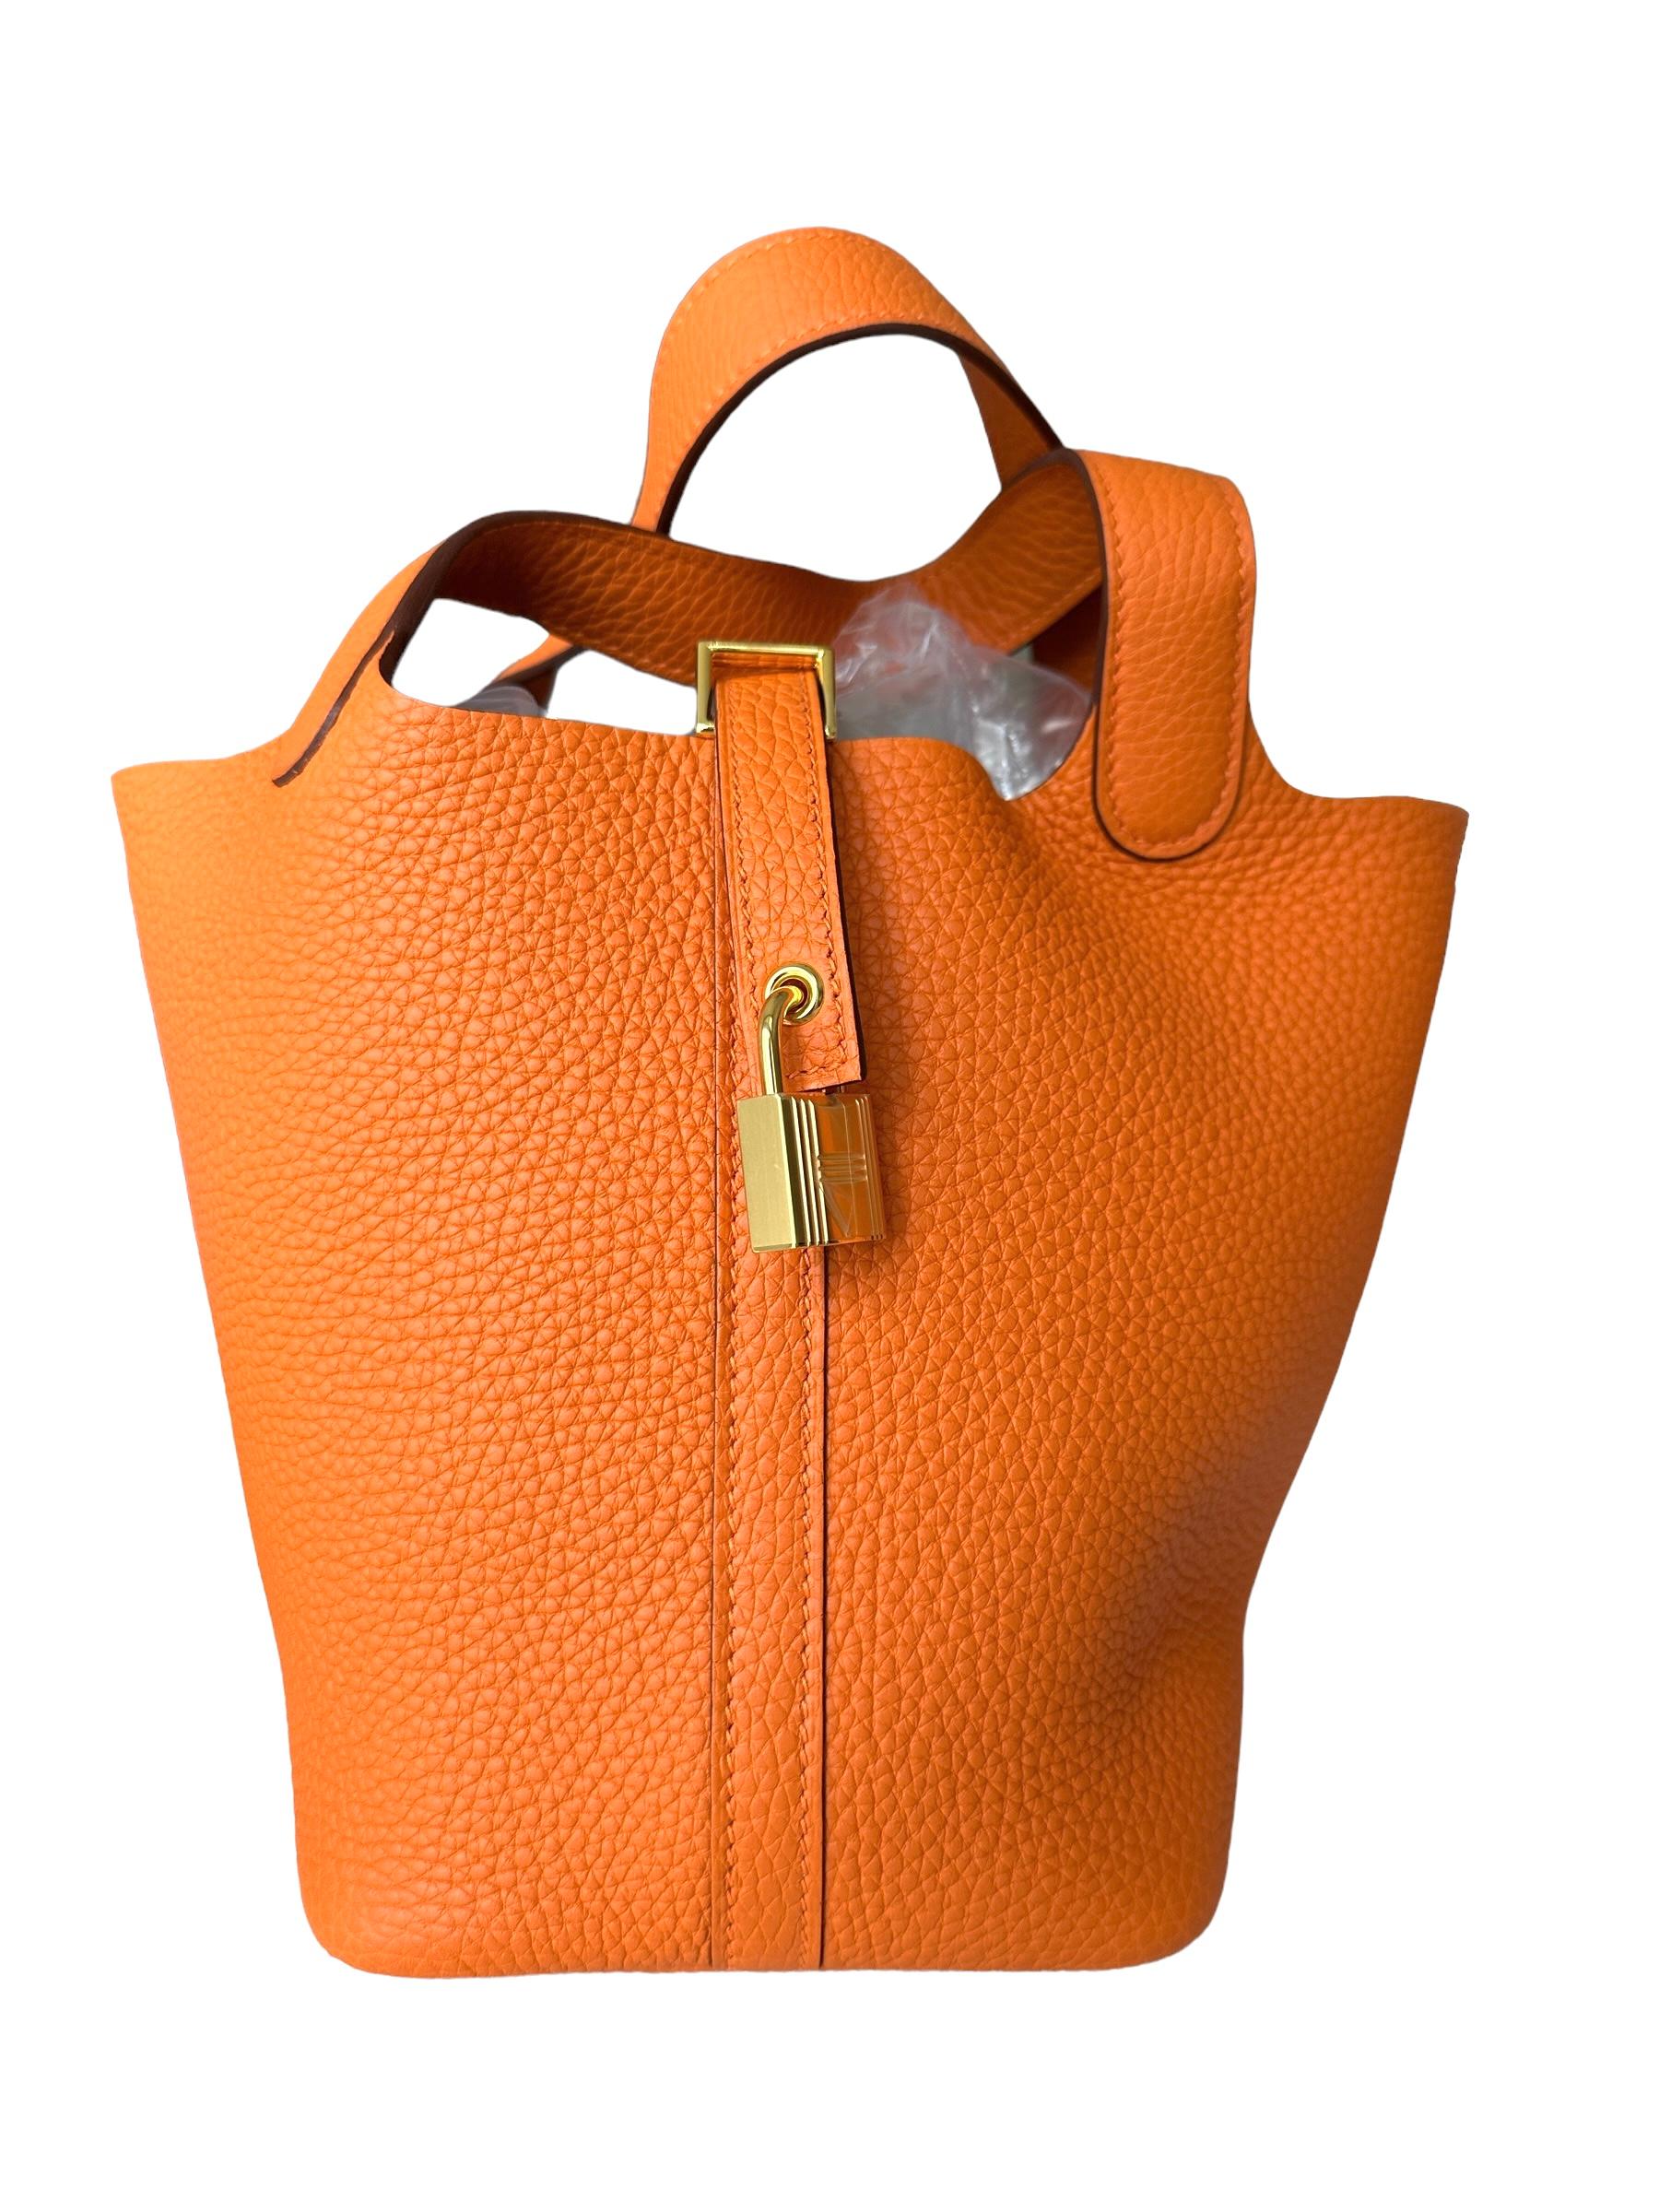 Hermes
Hermes Picotin Lock 18cm of Orange clemence leather with gold hardware.
Yes Hermes Orange is Back!
Hermes Signature Color, you cant go wrong
Gold plated hardware
So hard to get 
The Hermès Picotin 18 is a small handbag from the French luxury